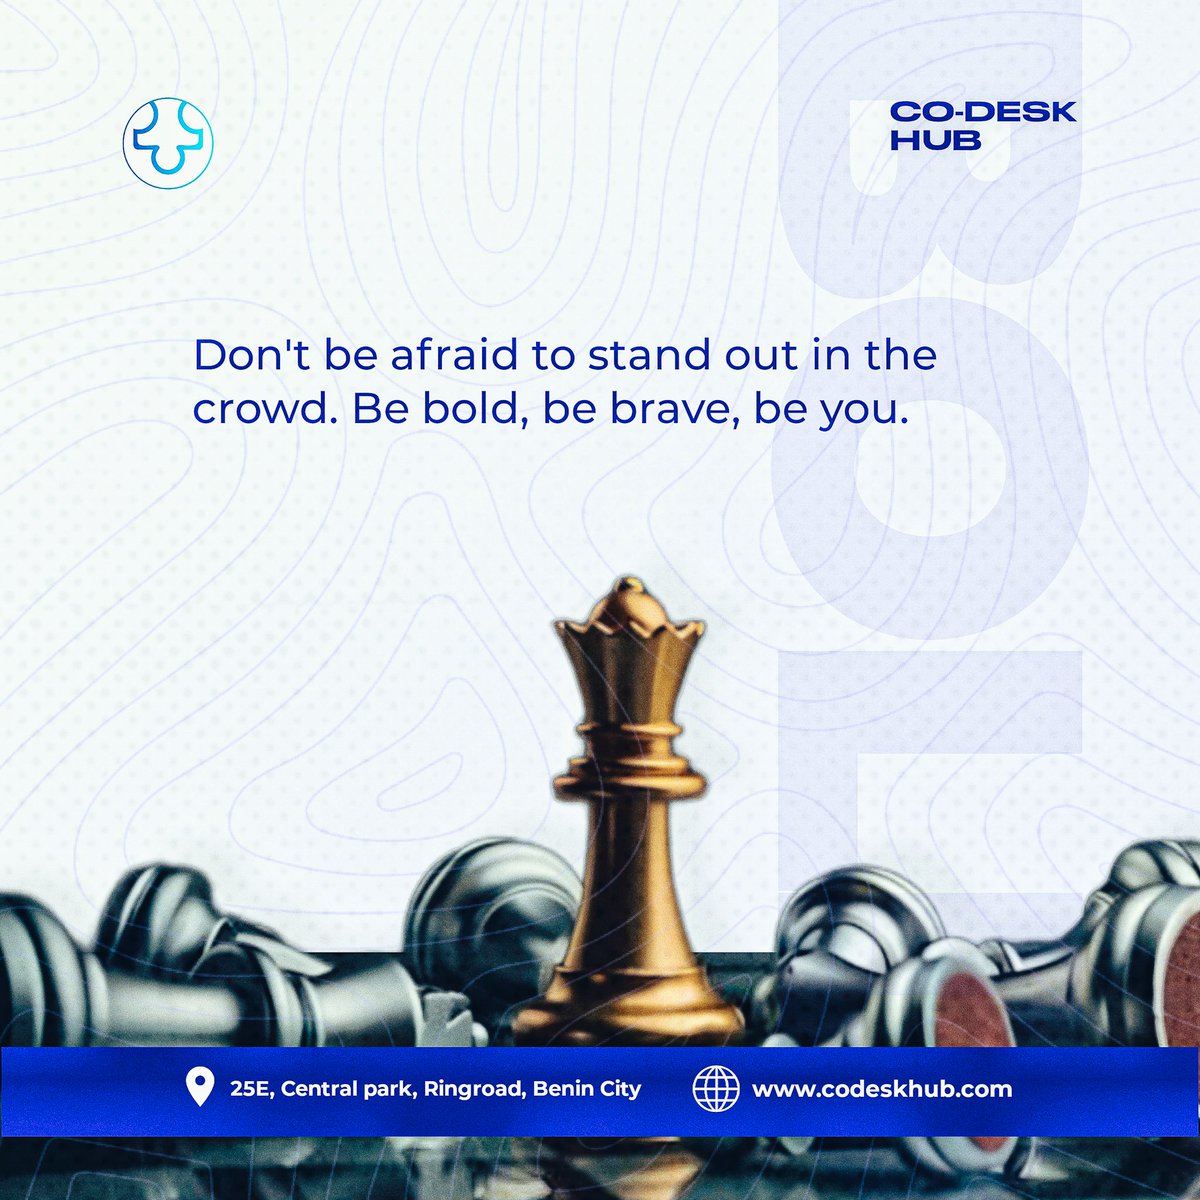 Monday motivation 
Happy new week, coworking team

Trending: Access bank